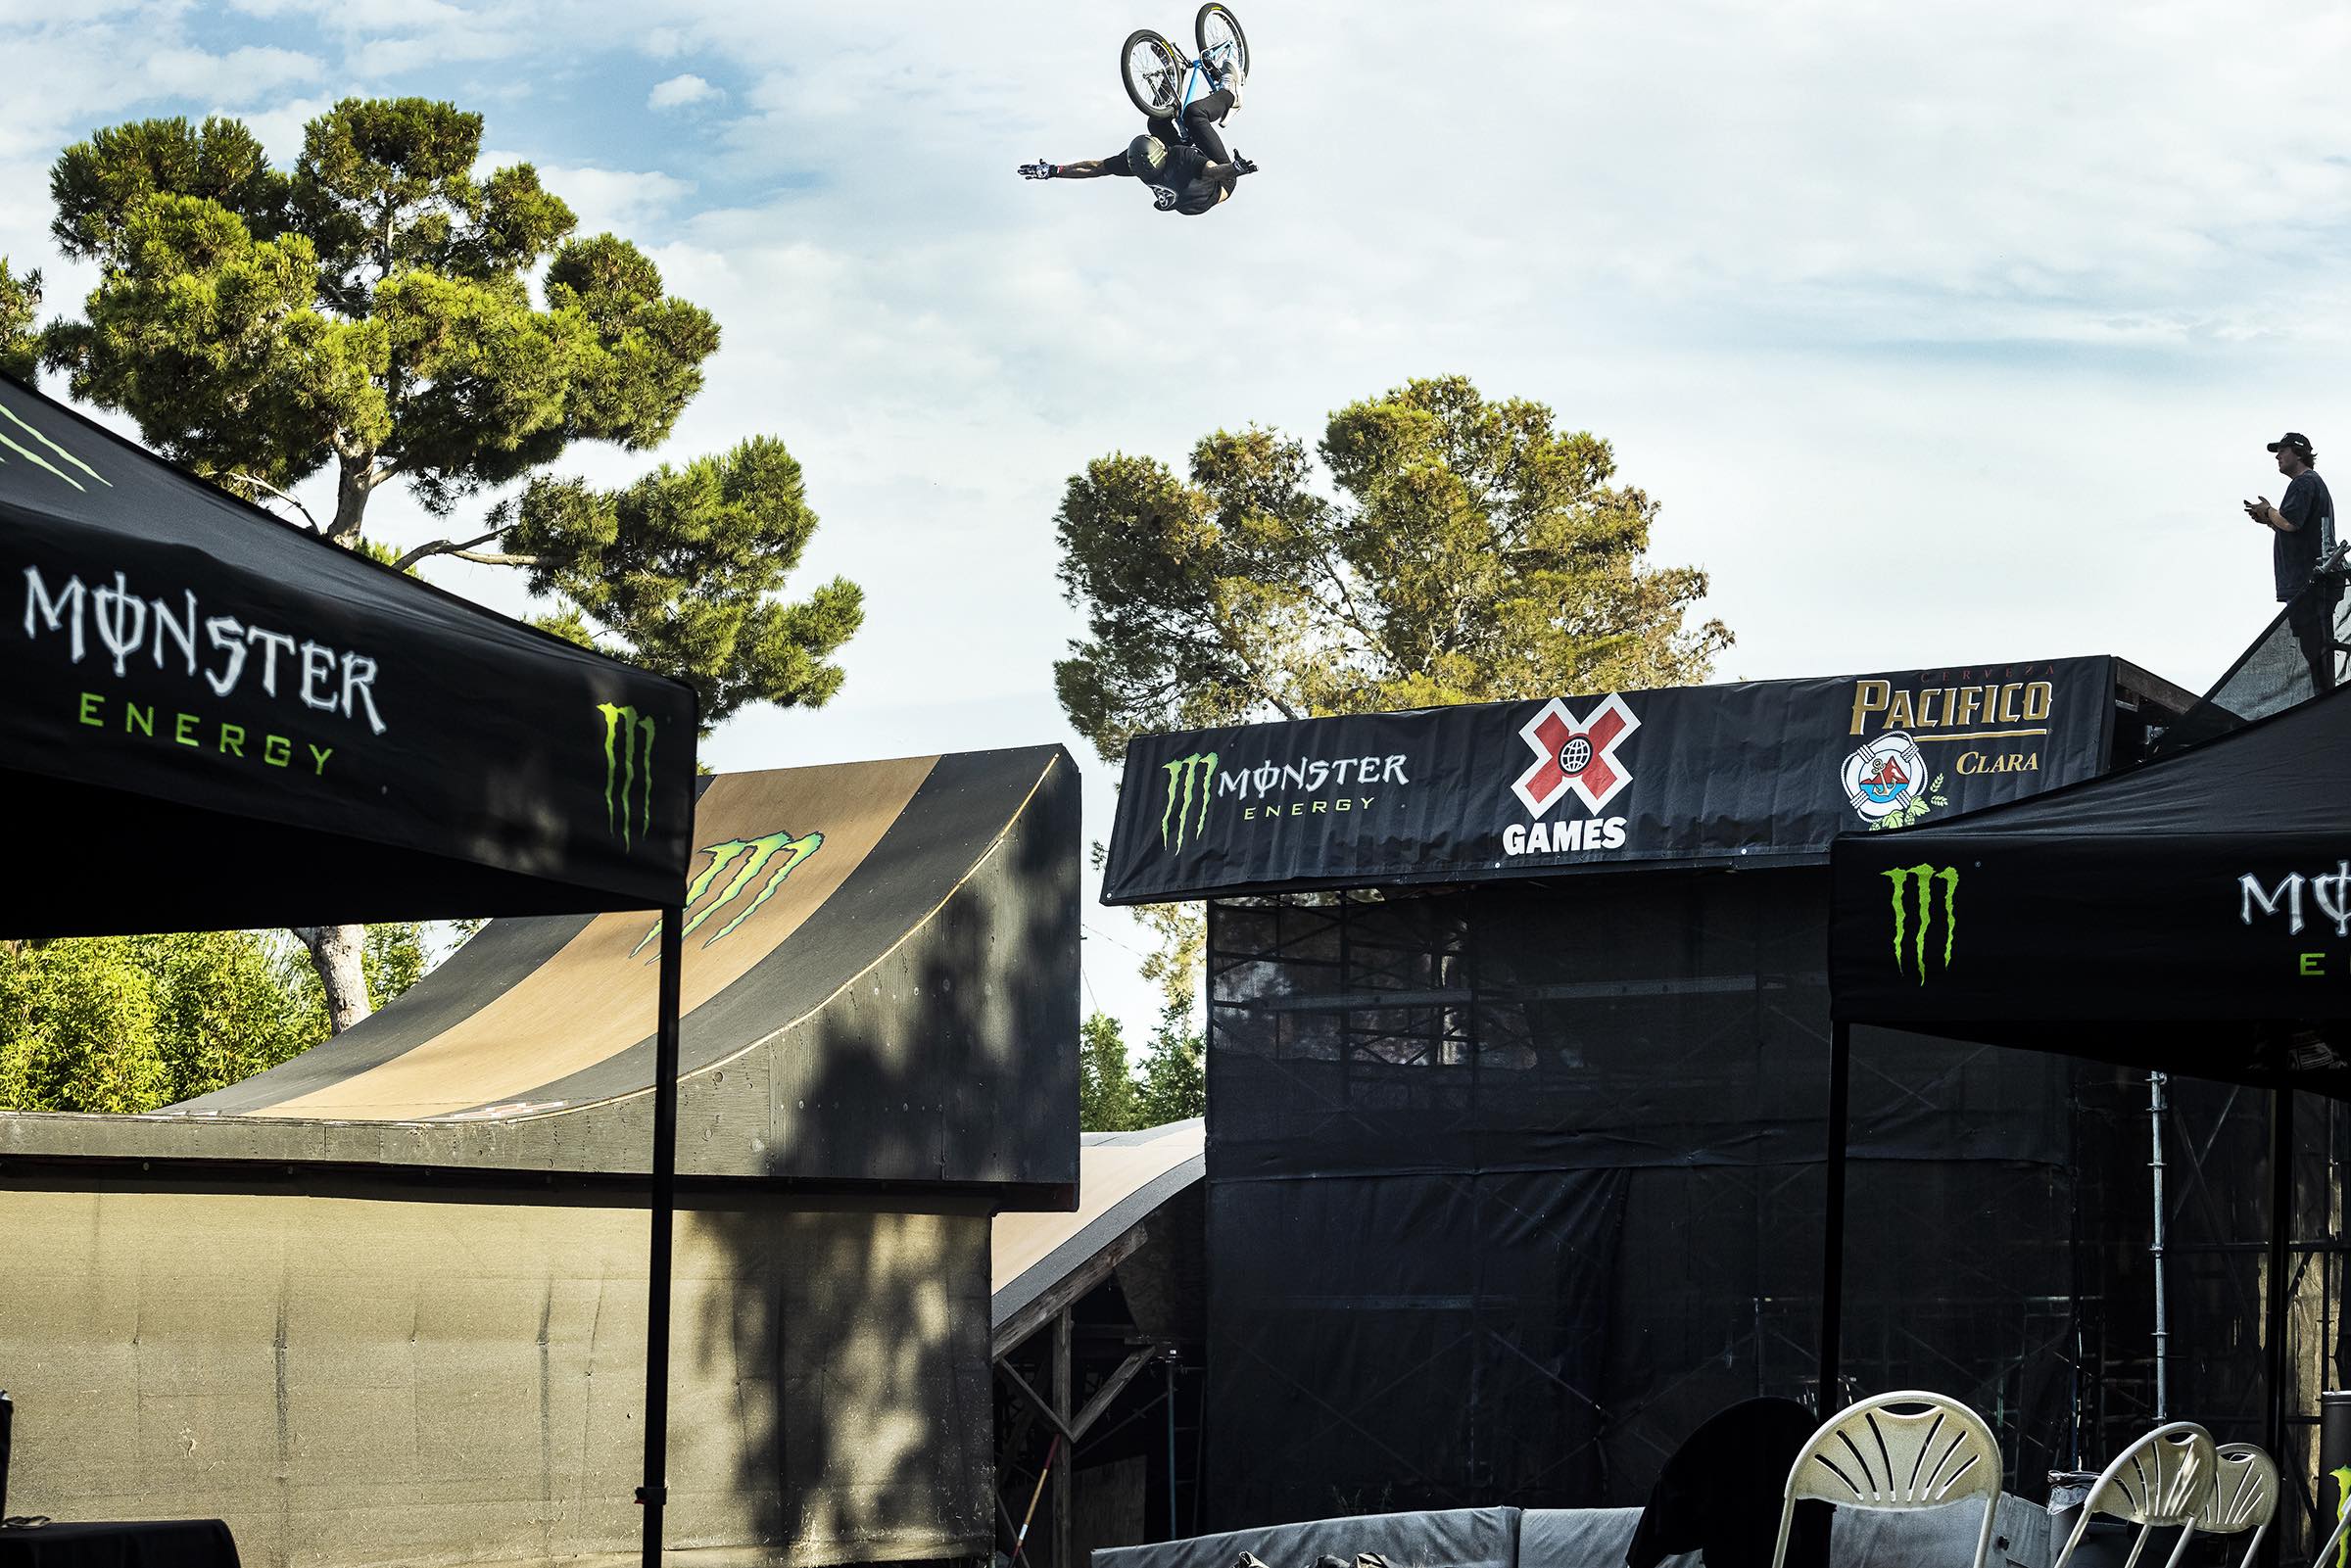 Monster Energy's Jaie Toohey Will Compete in BMX Dirt, BMX Dirt Best Trick and BMX MegaPark at X Games California 2023